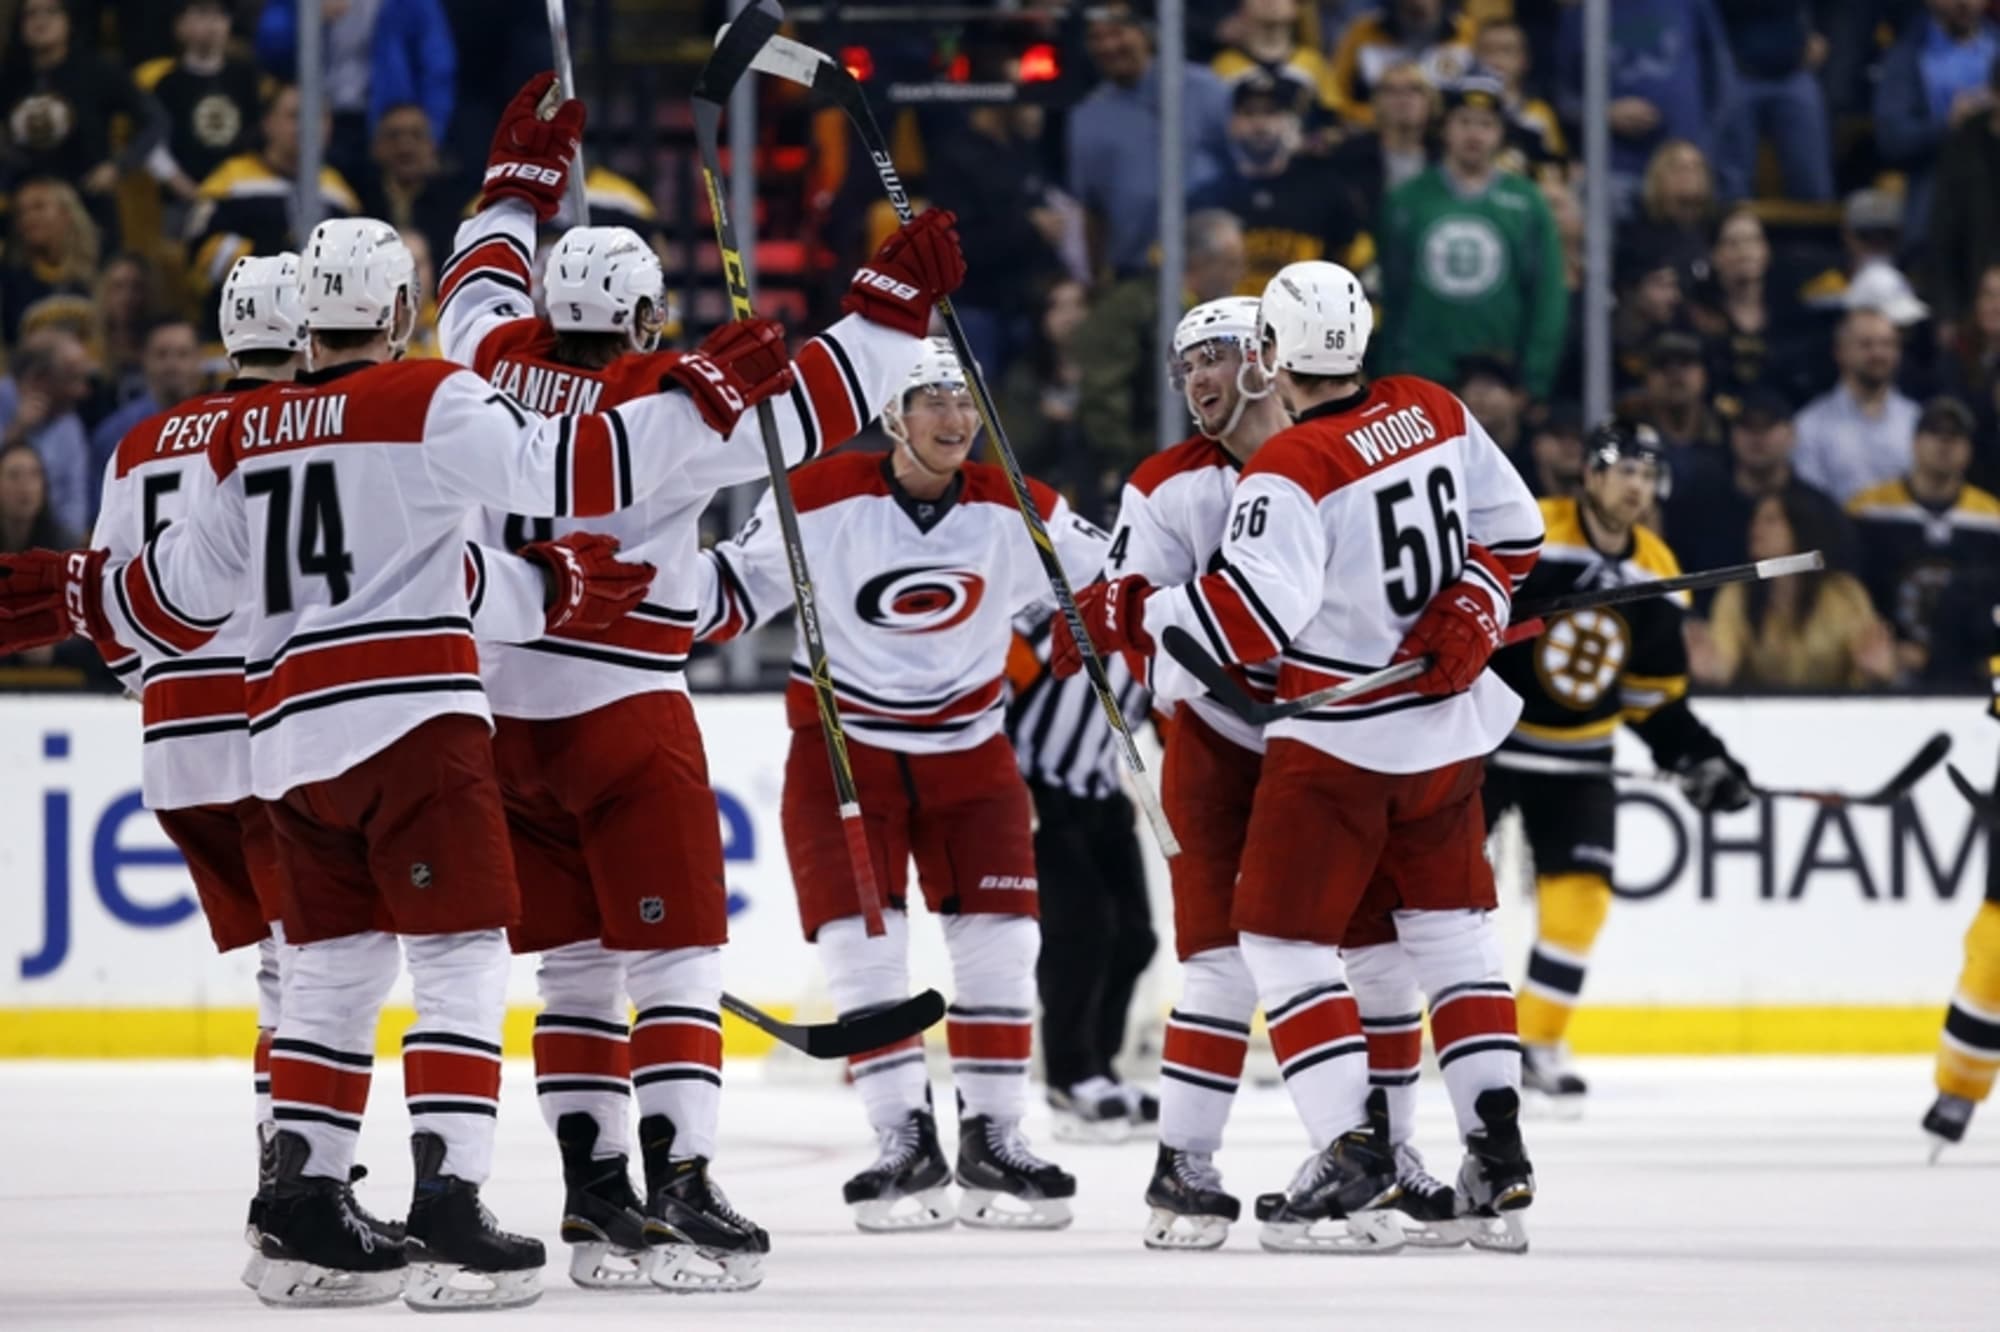 Elias Lindholm revealed why he mocked the Hurricanes in his return to  Carolina - Article - Bardown